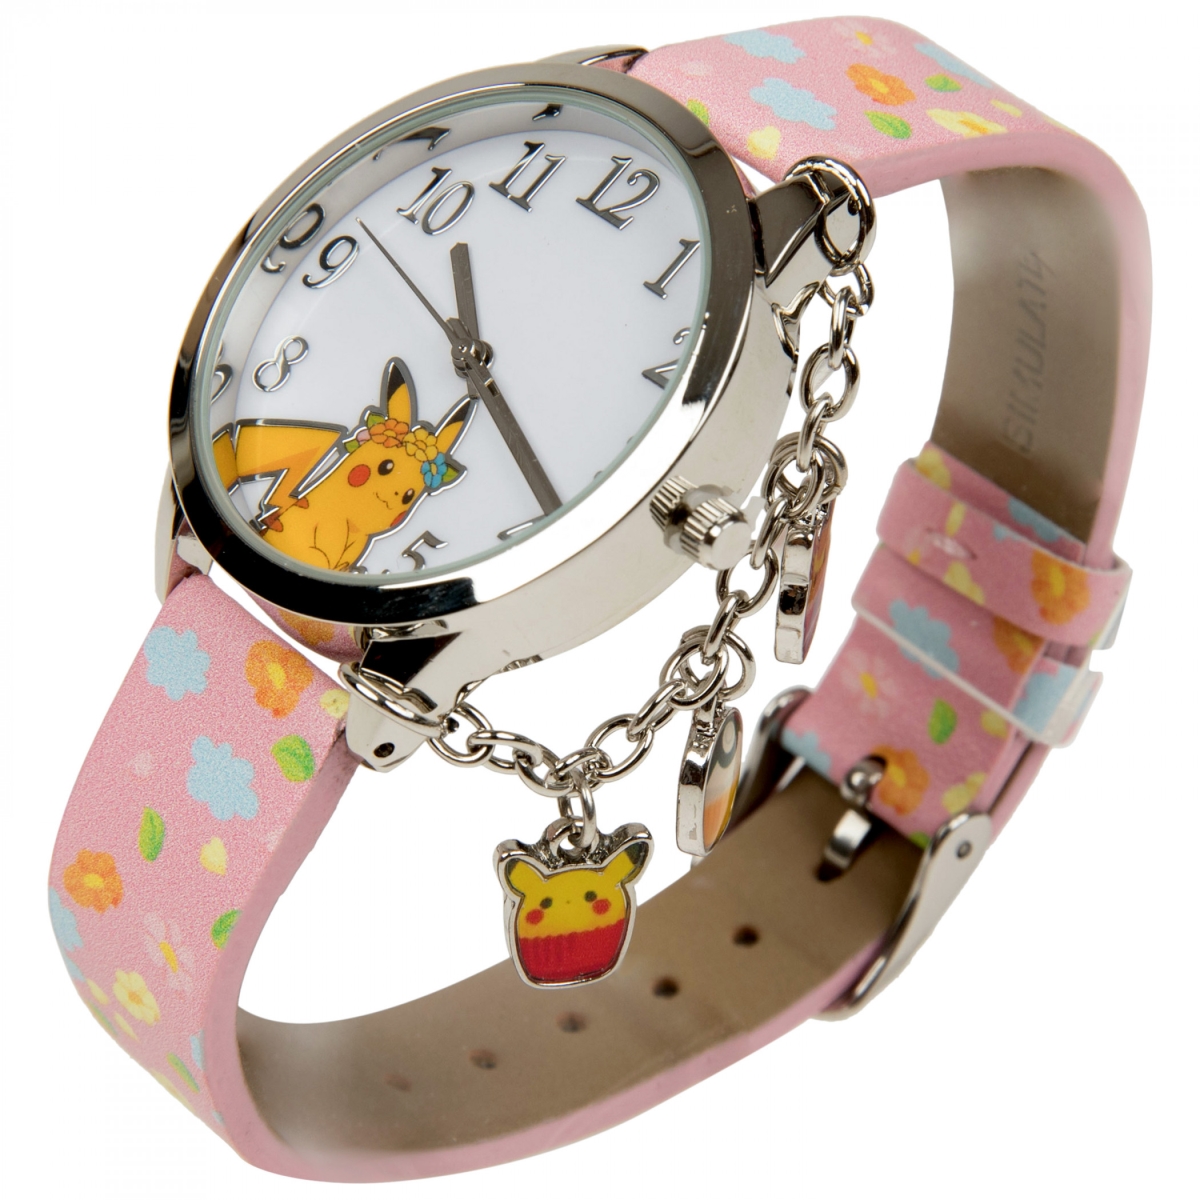 JUGUETE Nintendo Pikachu Watch with Charms & Silicone Band